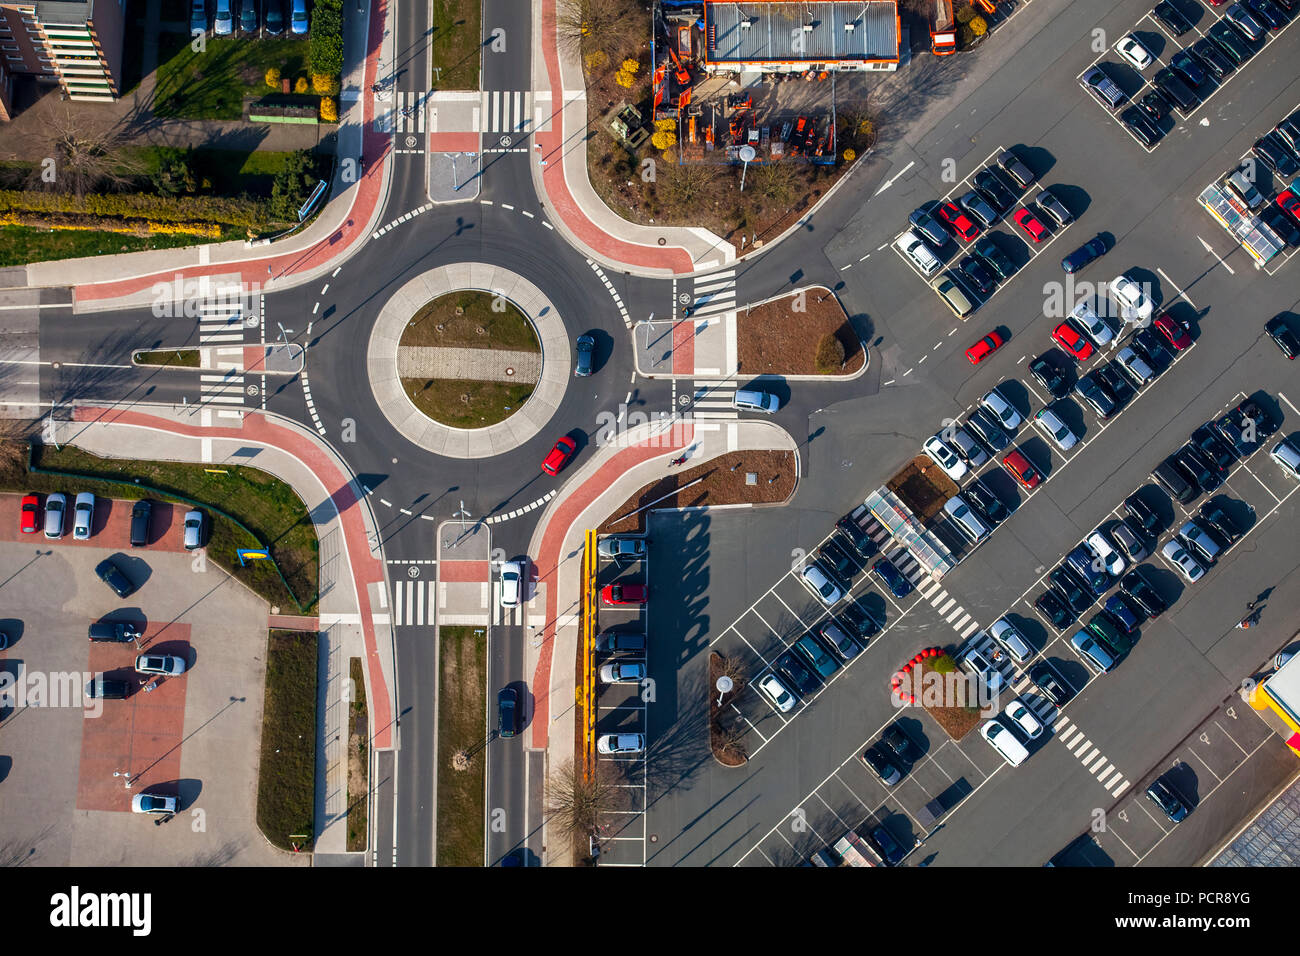 new roundabout on the Bochumer Strasse opposite Hornbach, pedestrian crossings, parking lot, bicycle markings, lane markings, Herne, Ruhr area, North Rhine-Westphalia, Germany Stock Photo